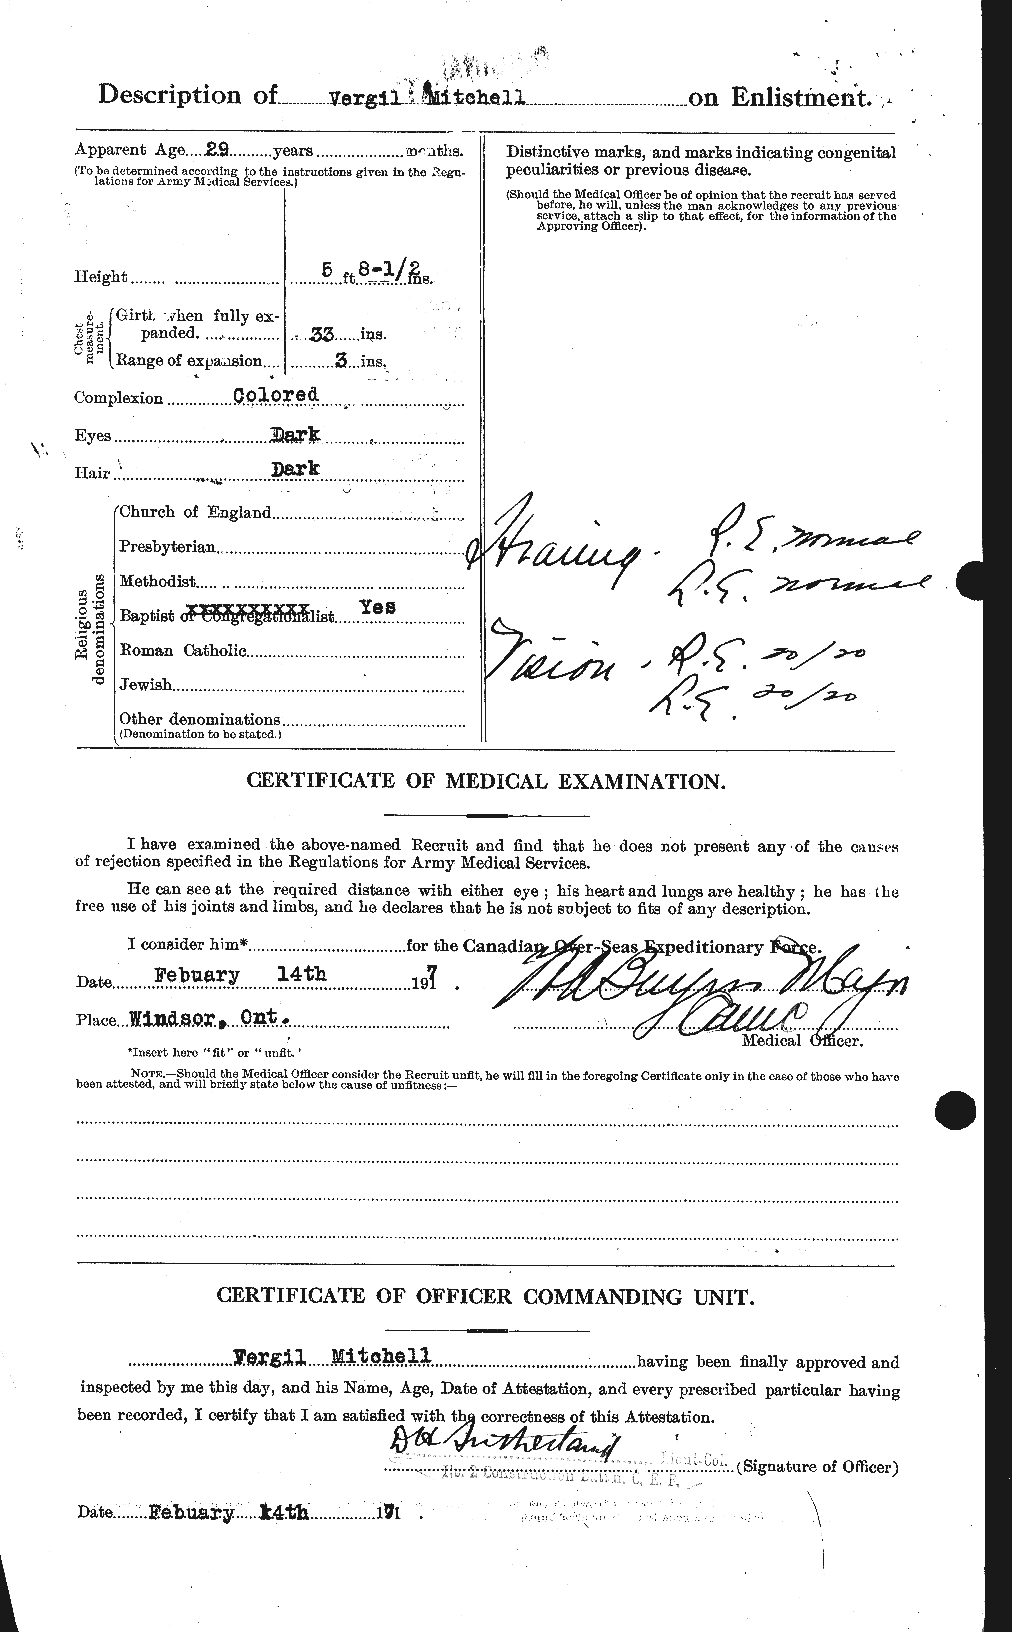 Personnel Records of the First World War - CEF 499981b